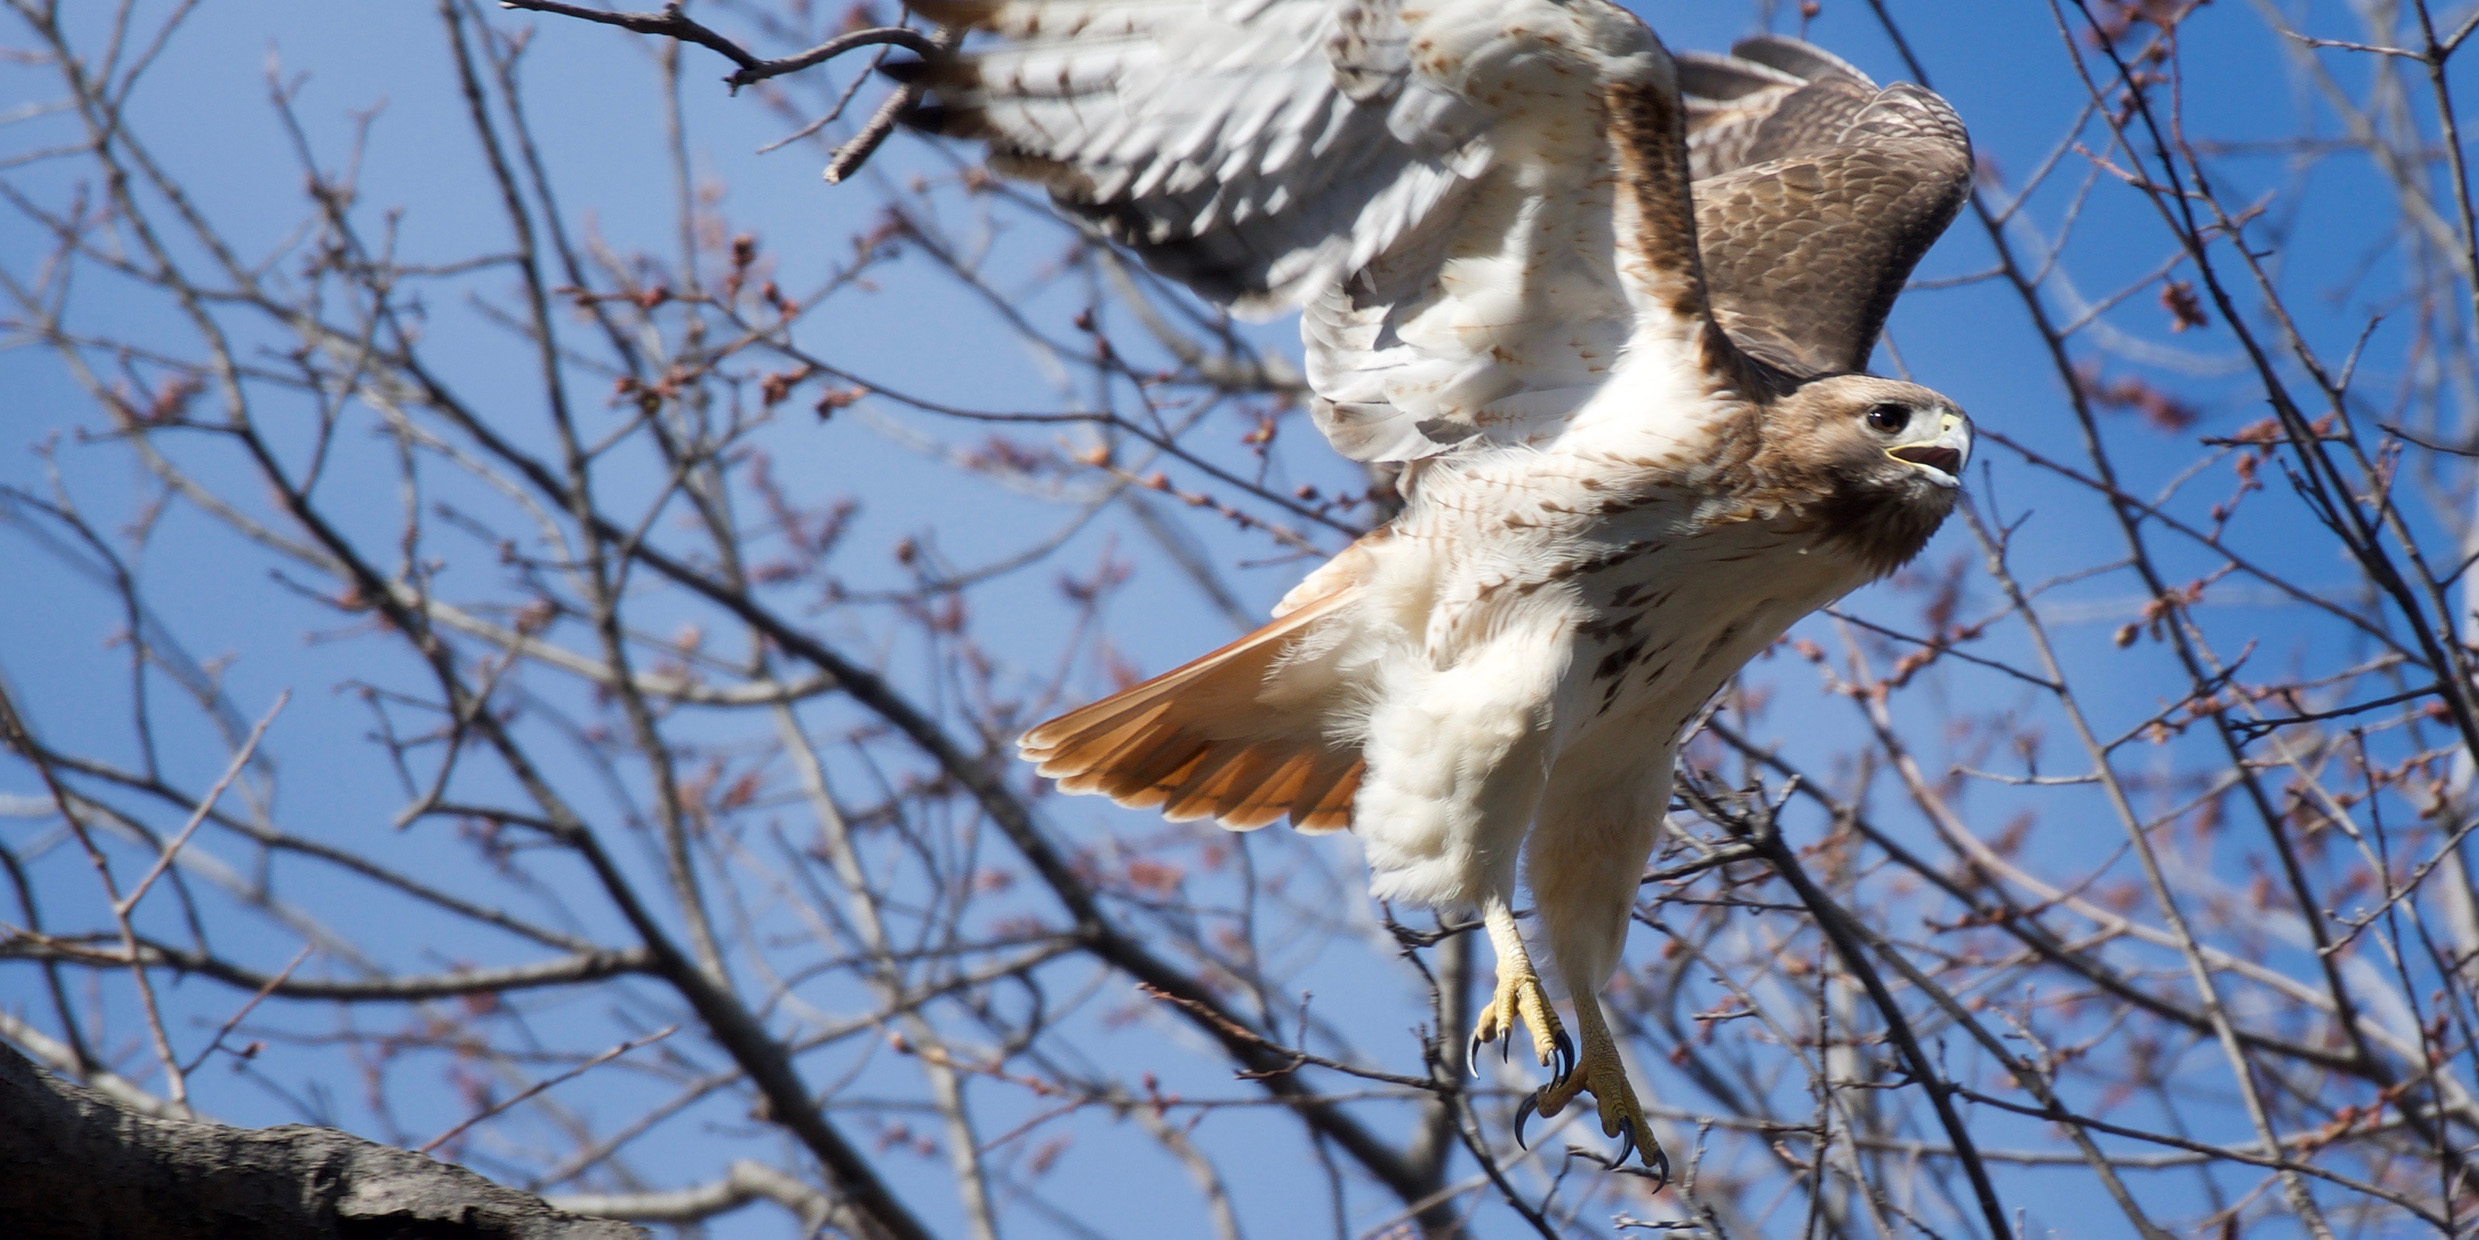 Image of a red-tailed hawk